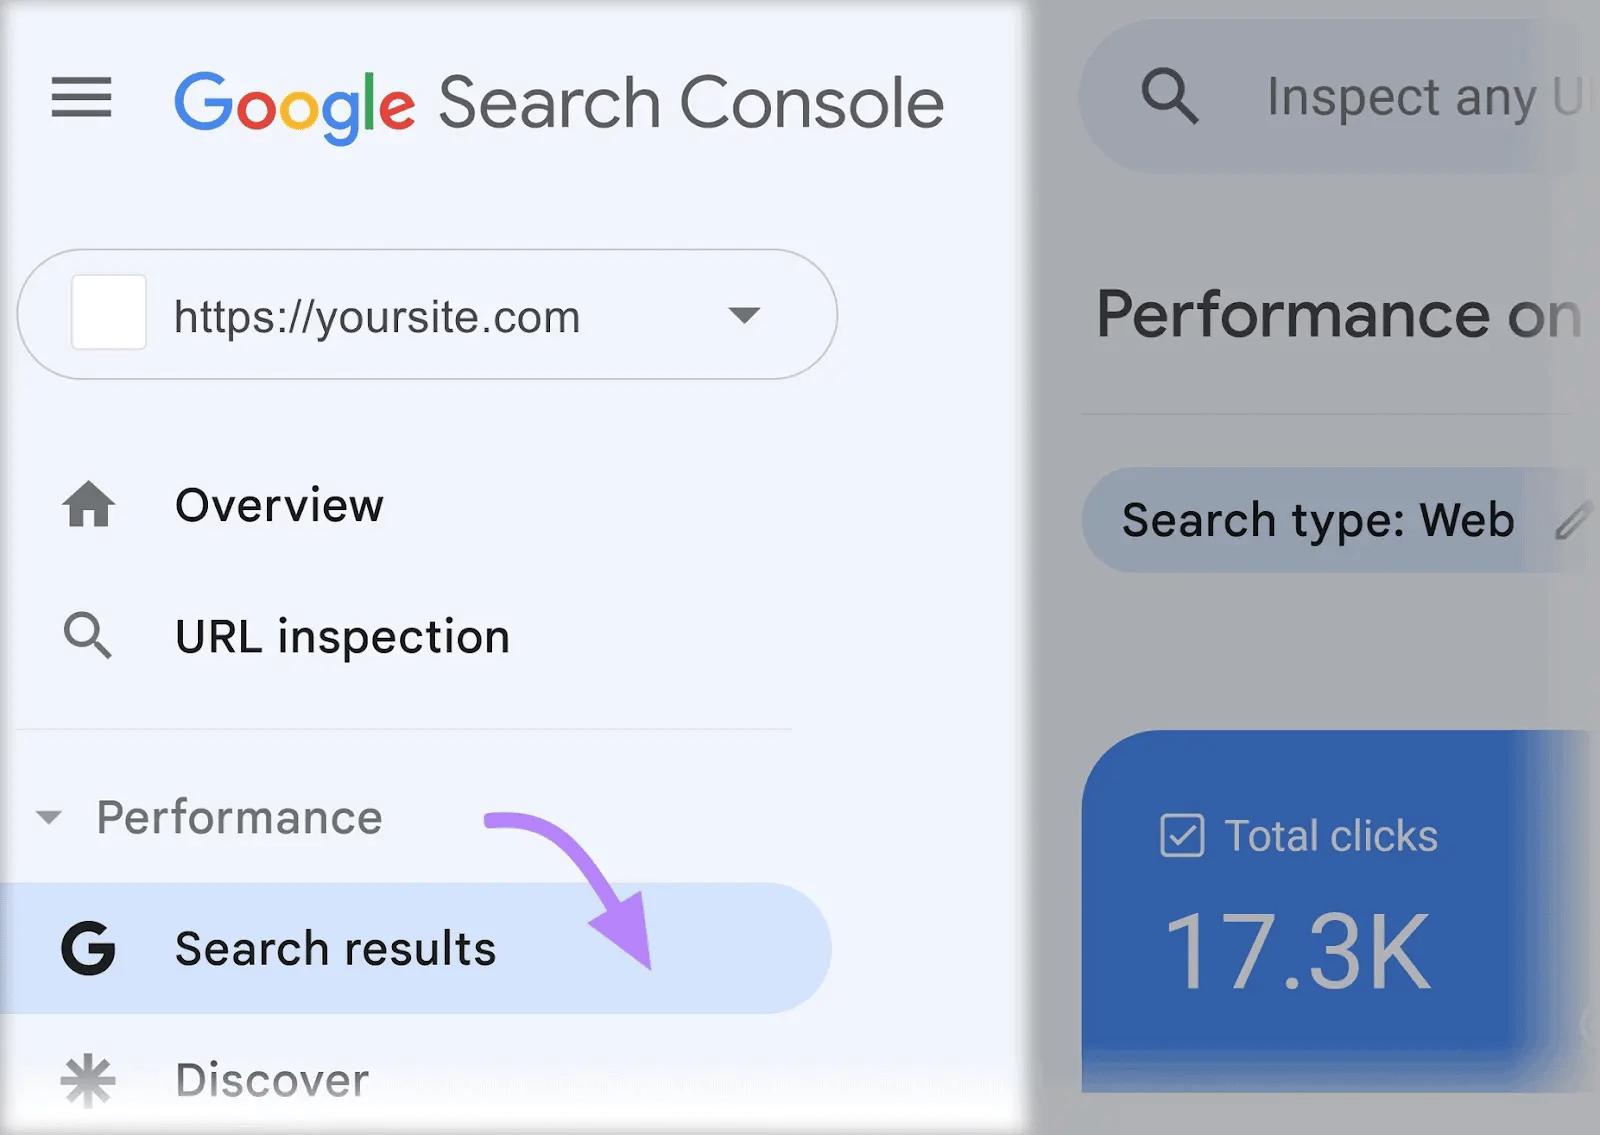 "Search results" button selected in Google Search Console sidebar